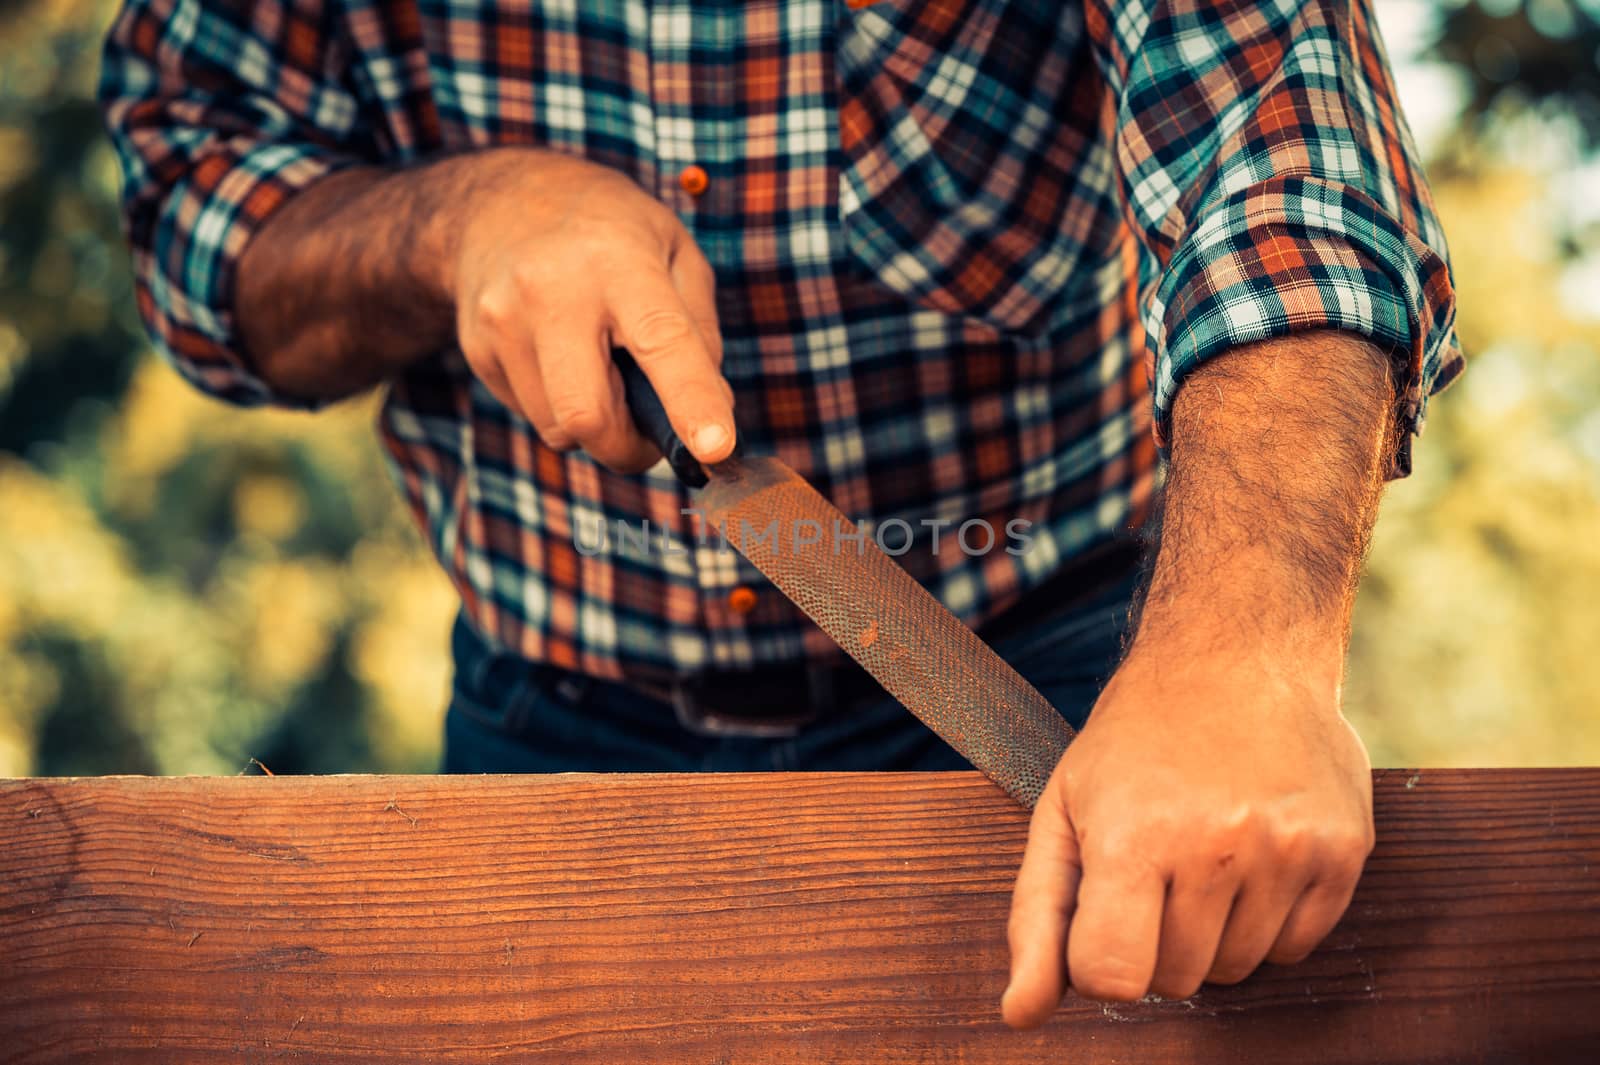 Carpenter using a wood rasp on the edge of a board outdoor